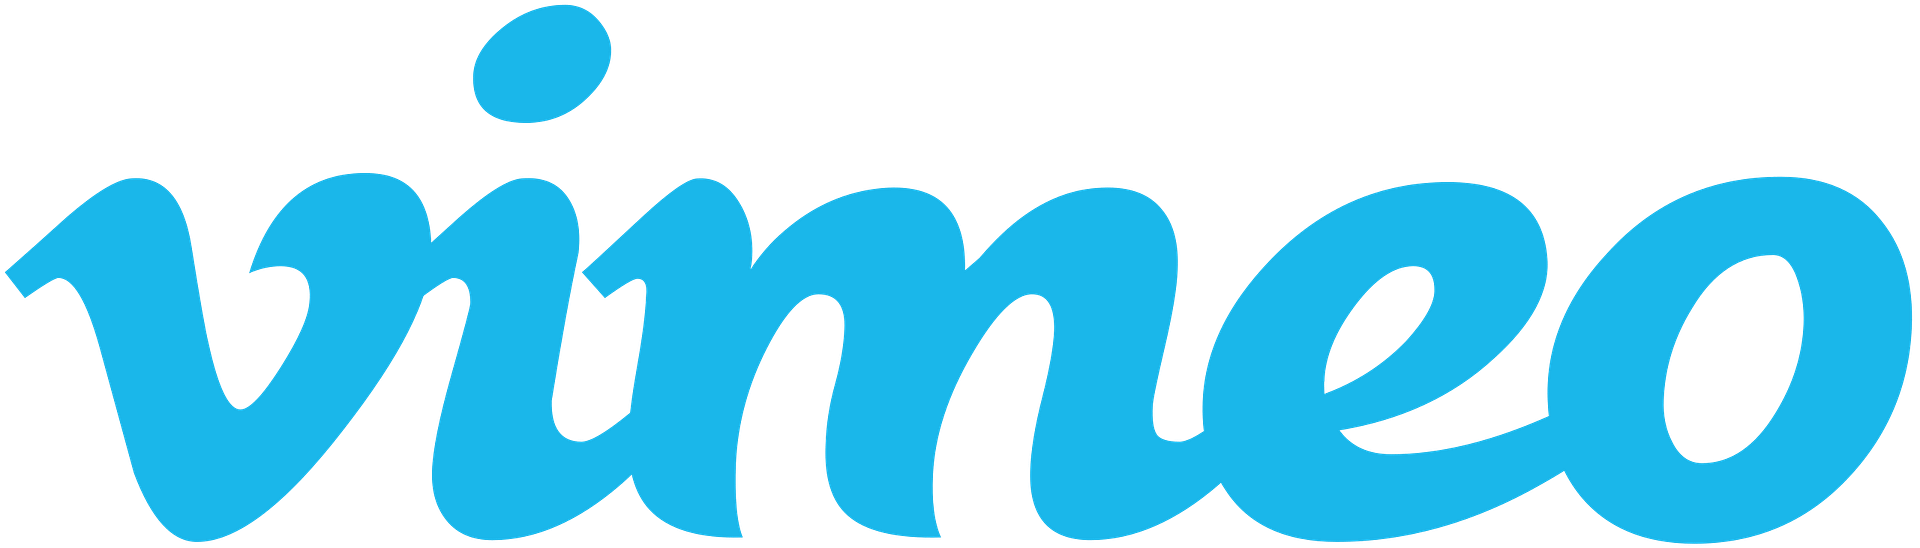 Vimeo, Inc. is an American video hosting, sharing, and services platform provider headquartered in New York City. Vimeo focuses on the delivery of high-definition video across a range of devices. Vimeo's business model is through software as a service.